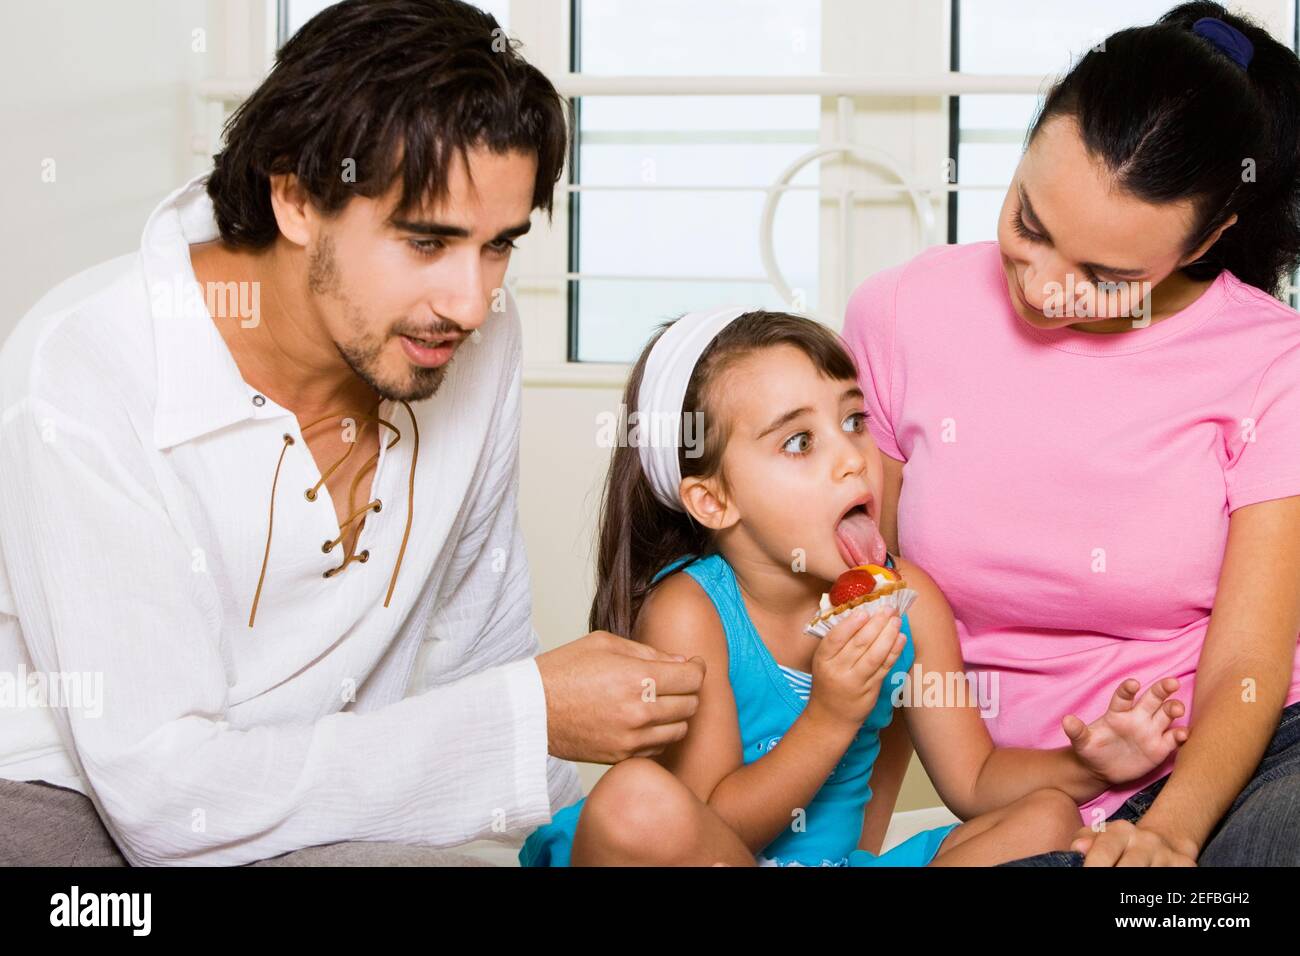 Close-up of a young couple looking at their daughter eating a pastry Stock Photo